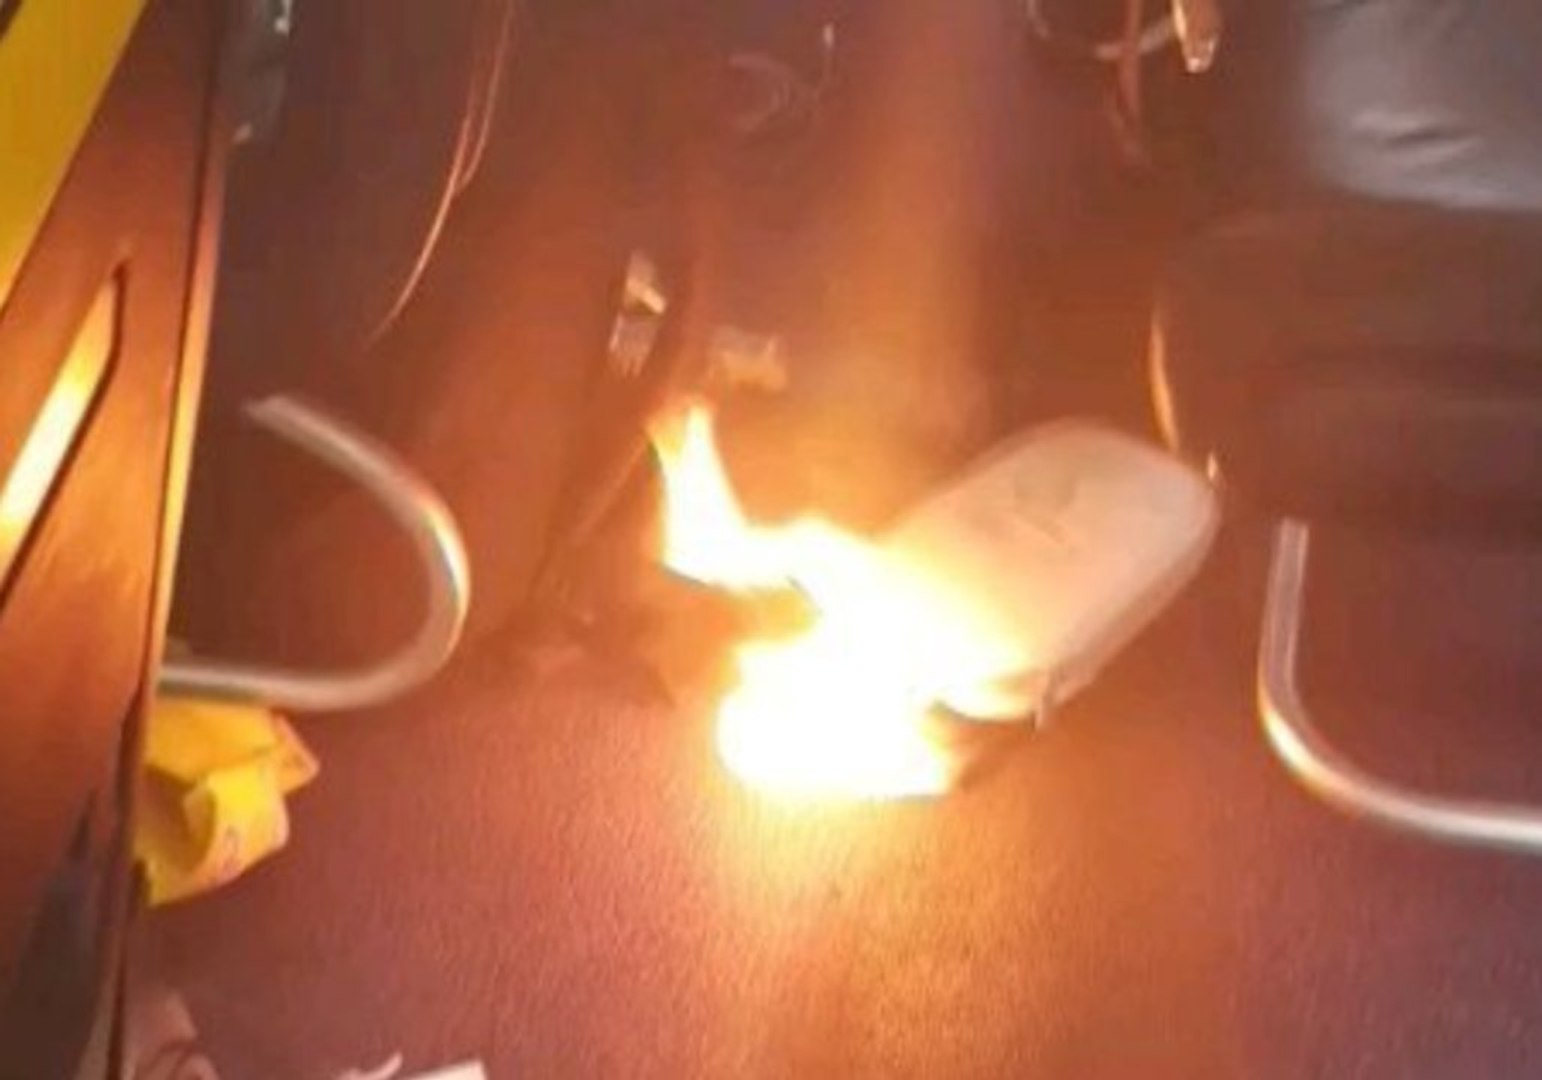 Mobile Device Bursts Into Flames on Ryanair Flight, Forcing Evacuation -  video Dailymotion